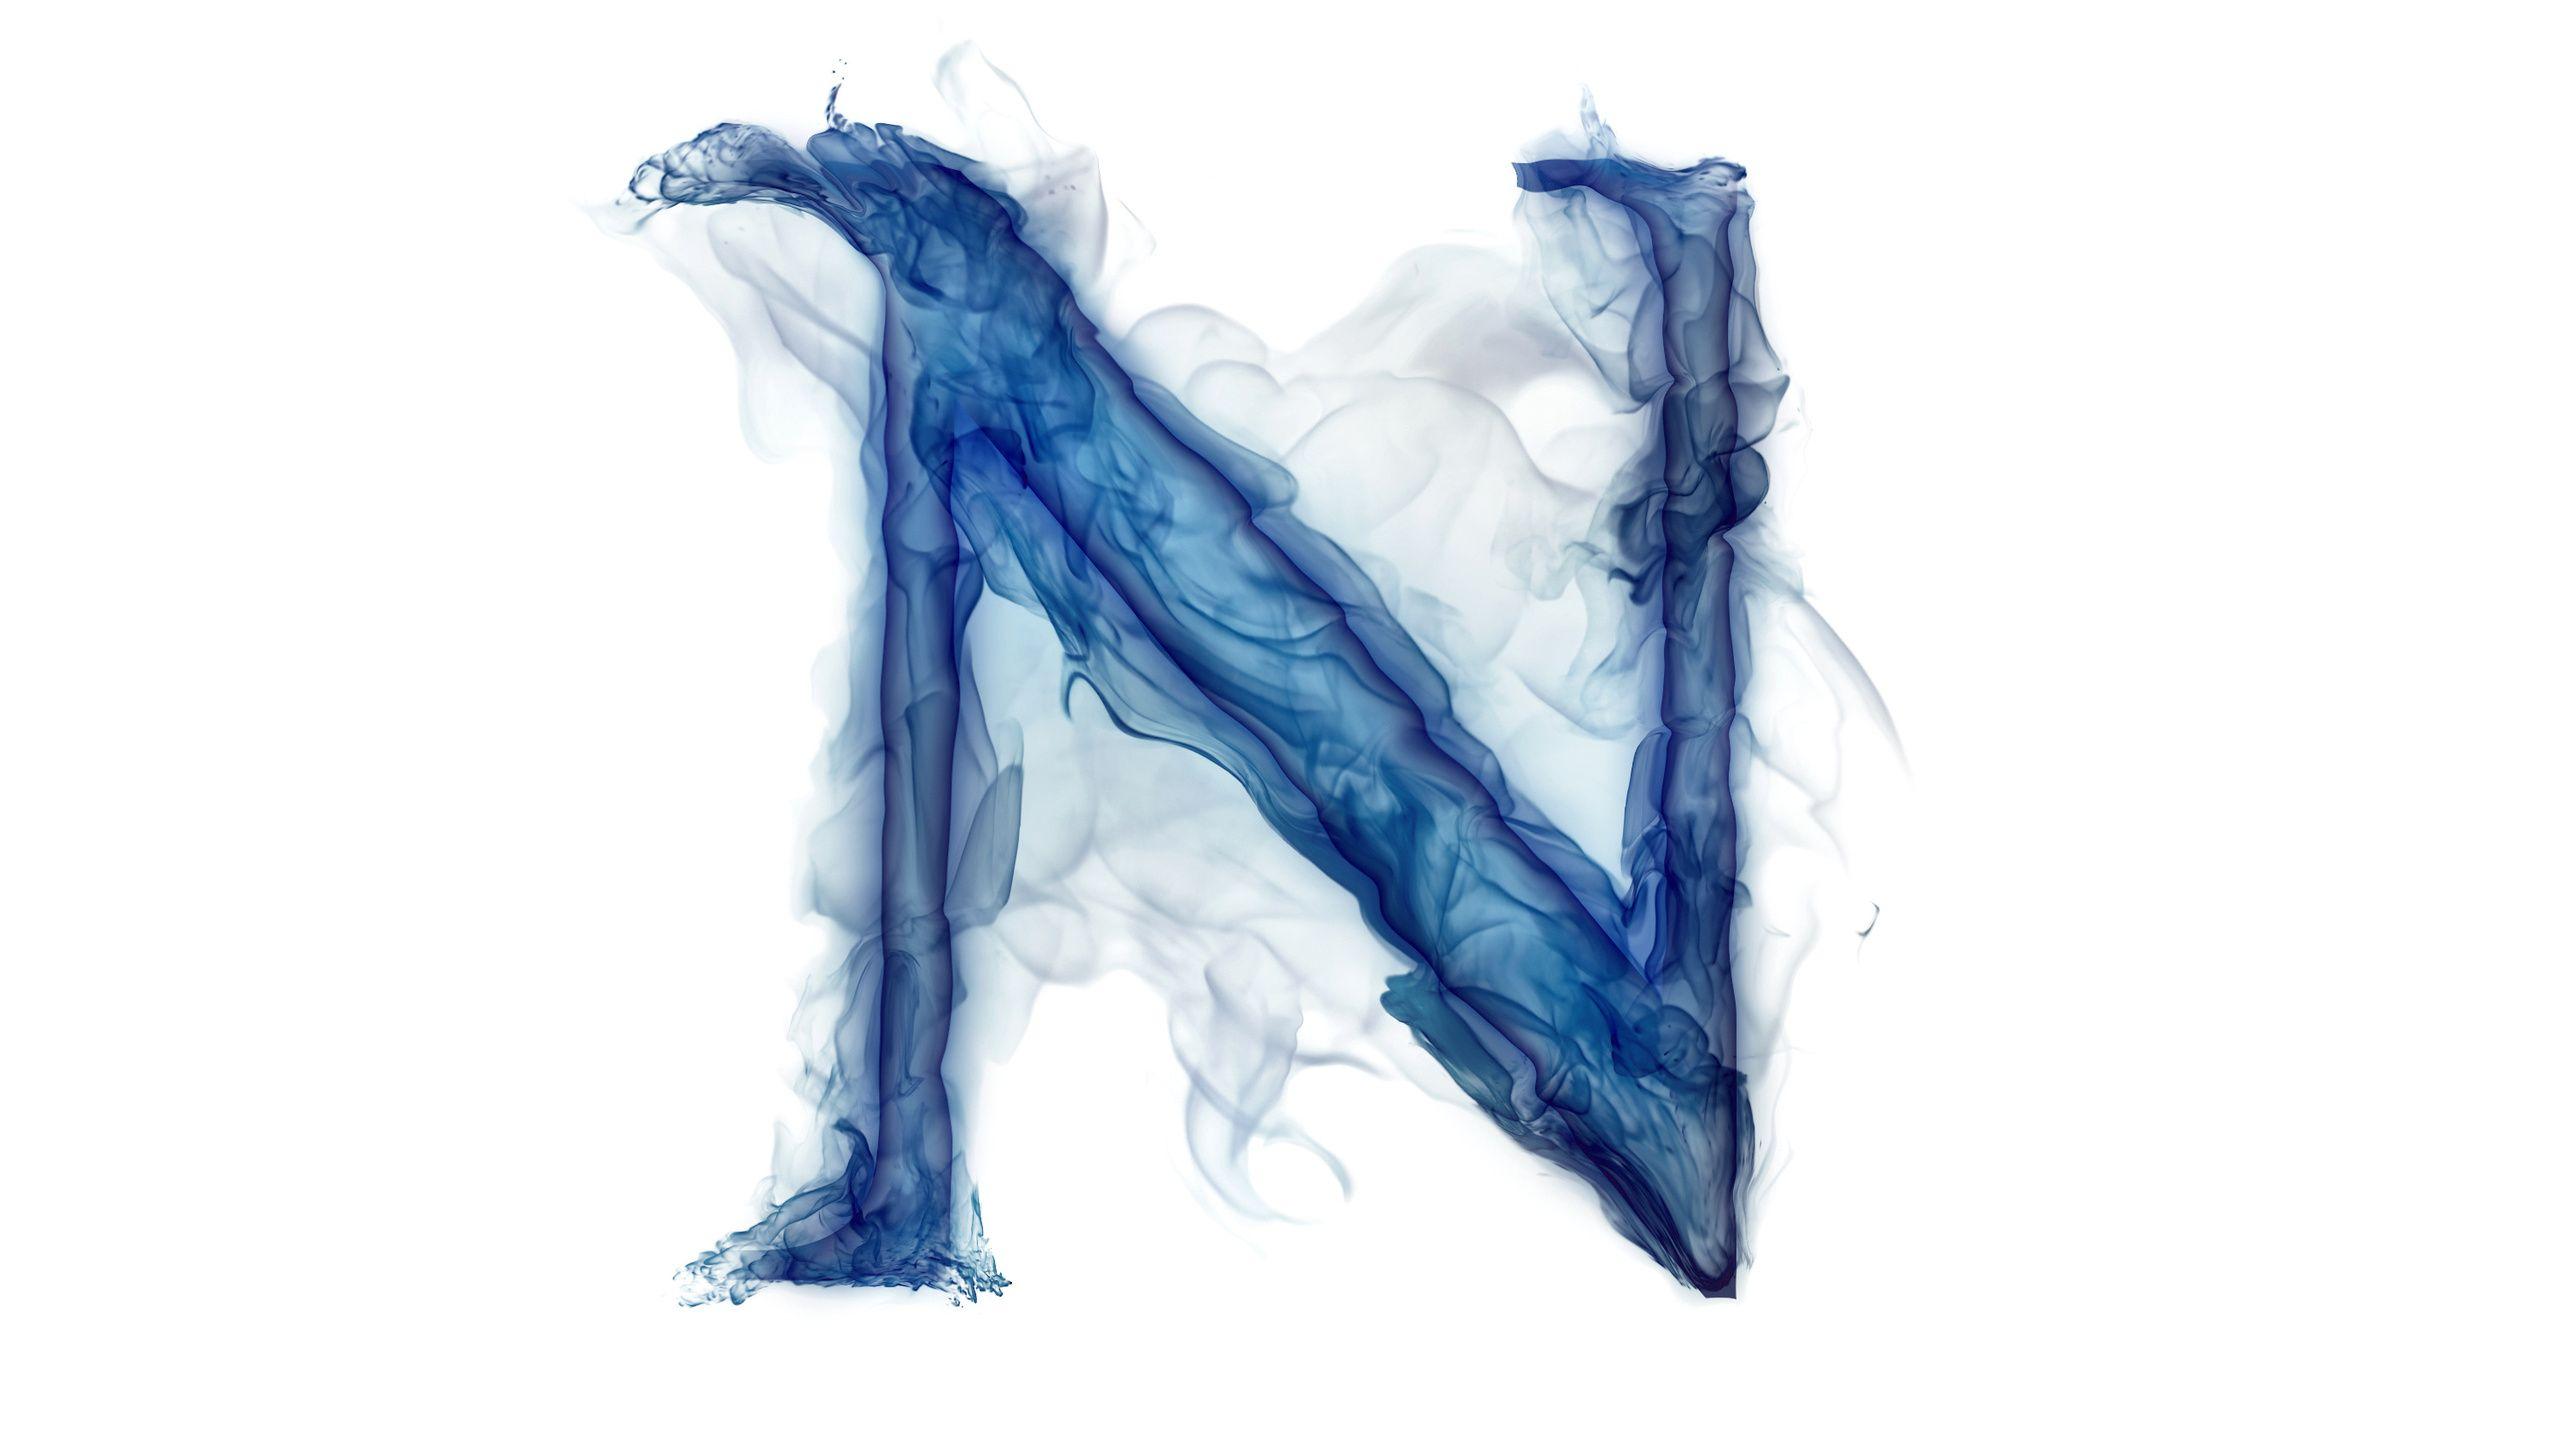 N, Smoke, Gas, Litera, Letter Wallpaper and Picture